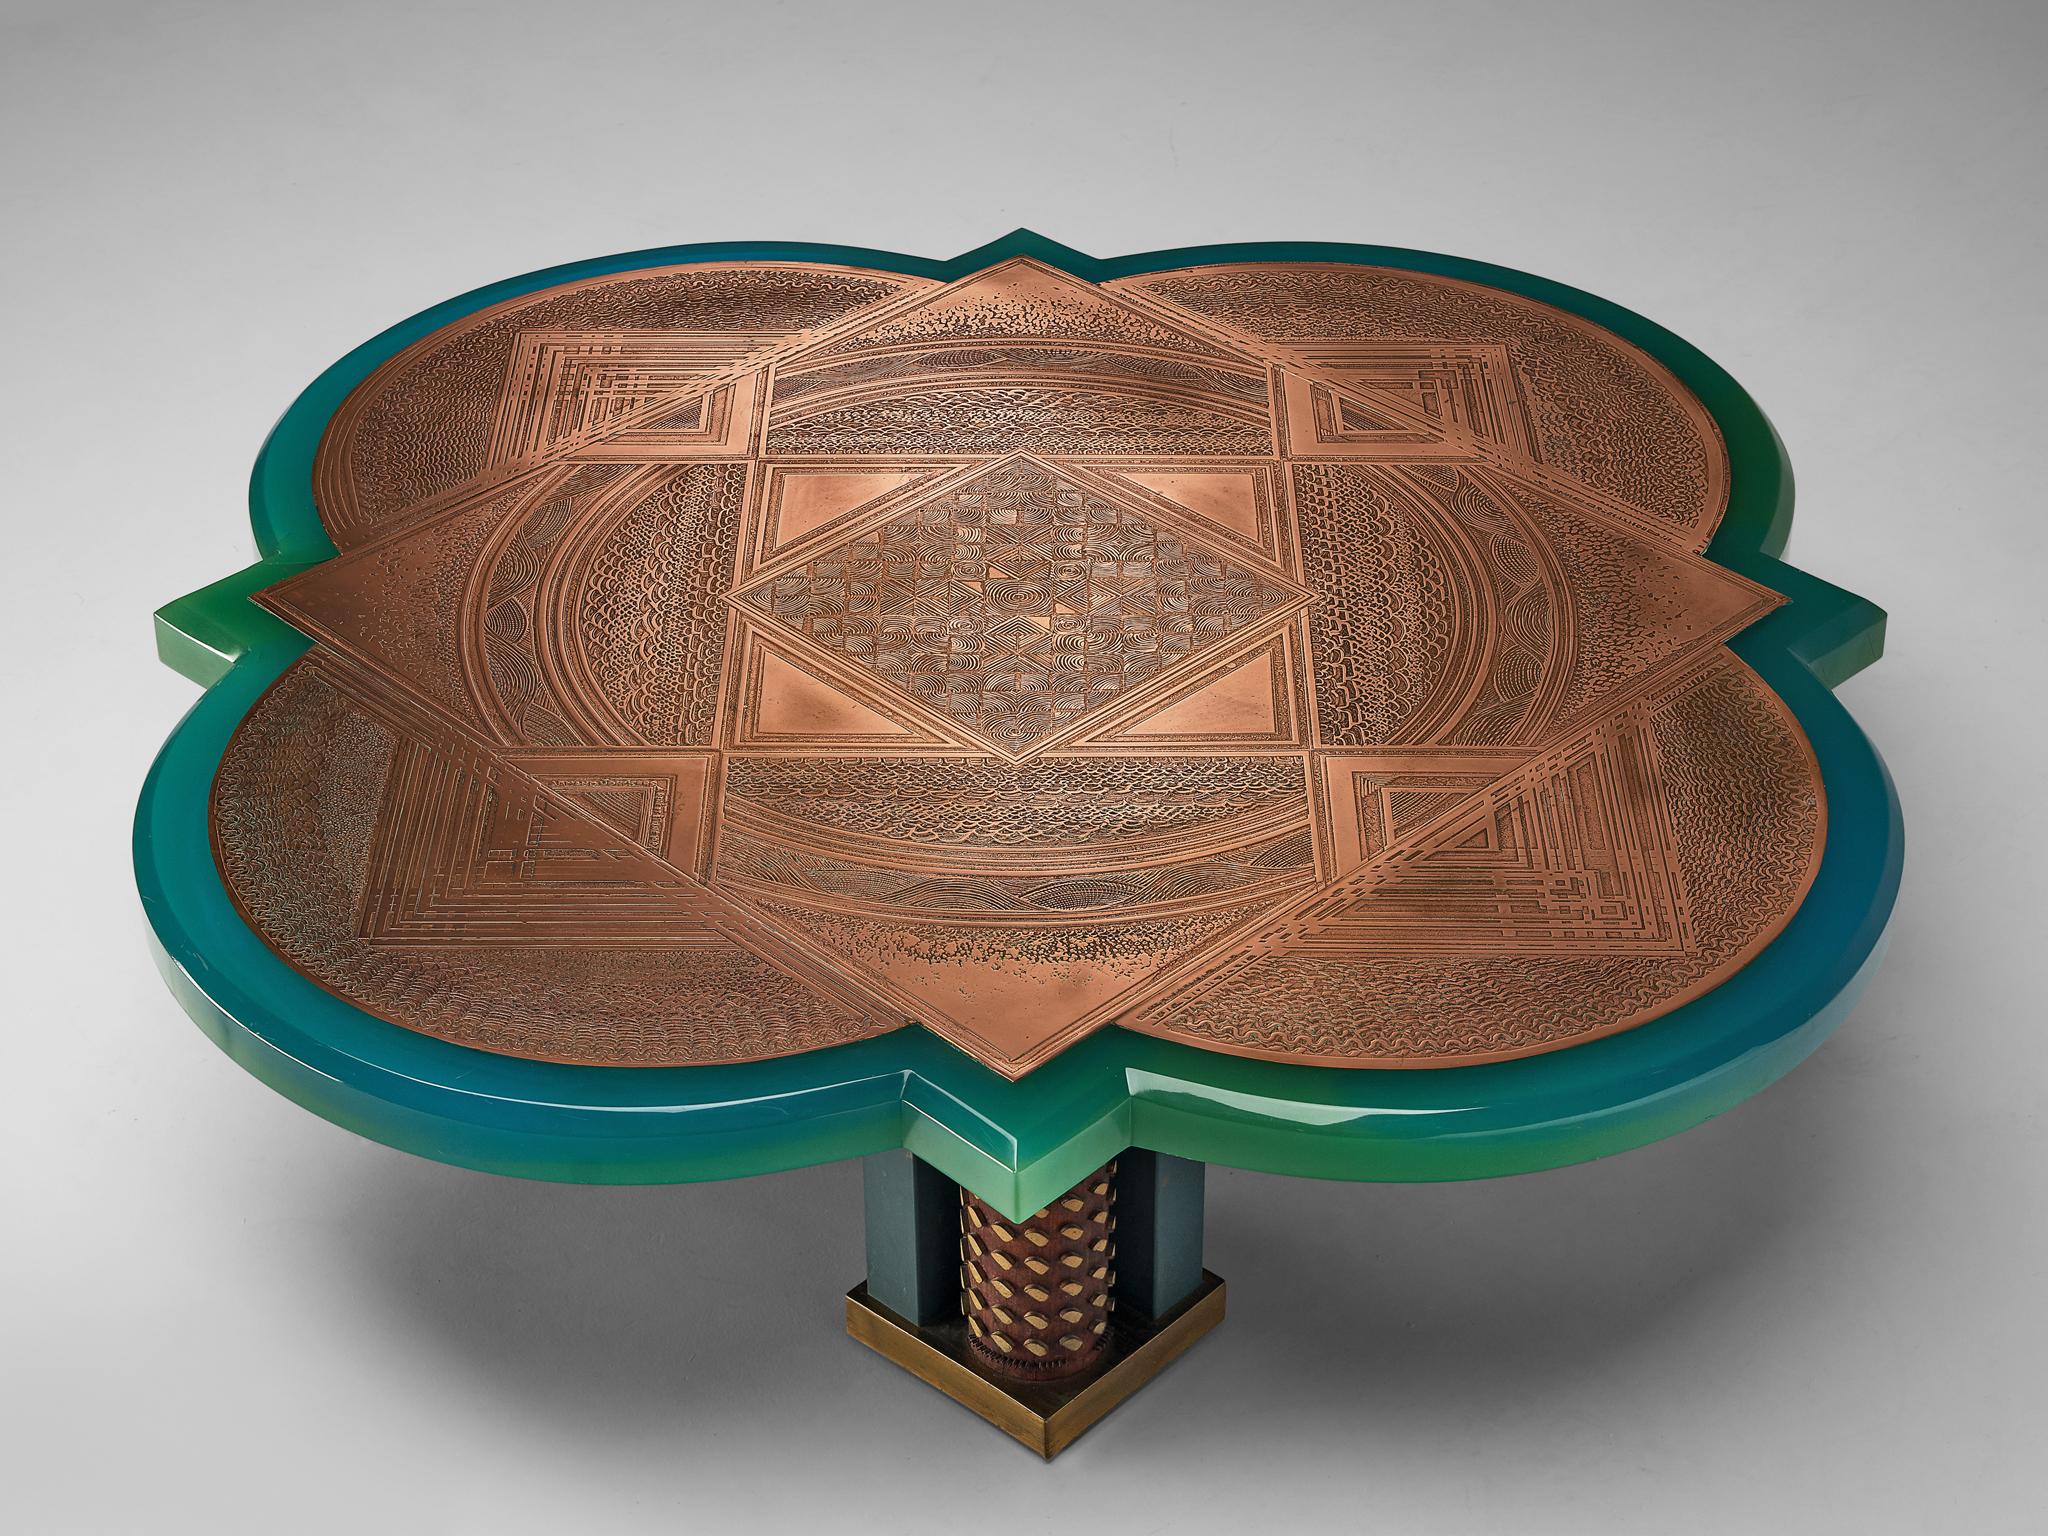 Unique Armand Jonckers Coffee Table in Green Resin and Copper 1